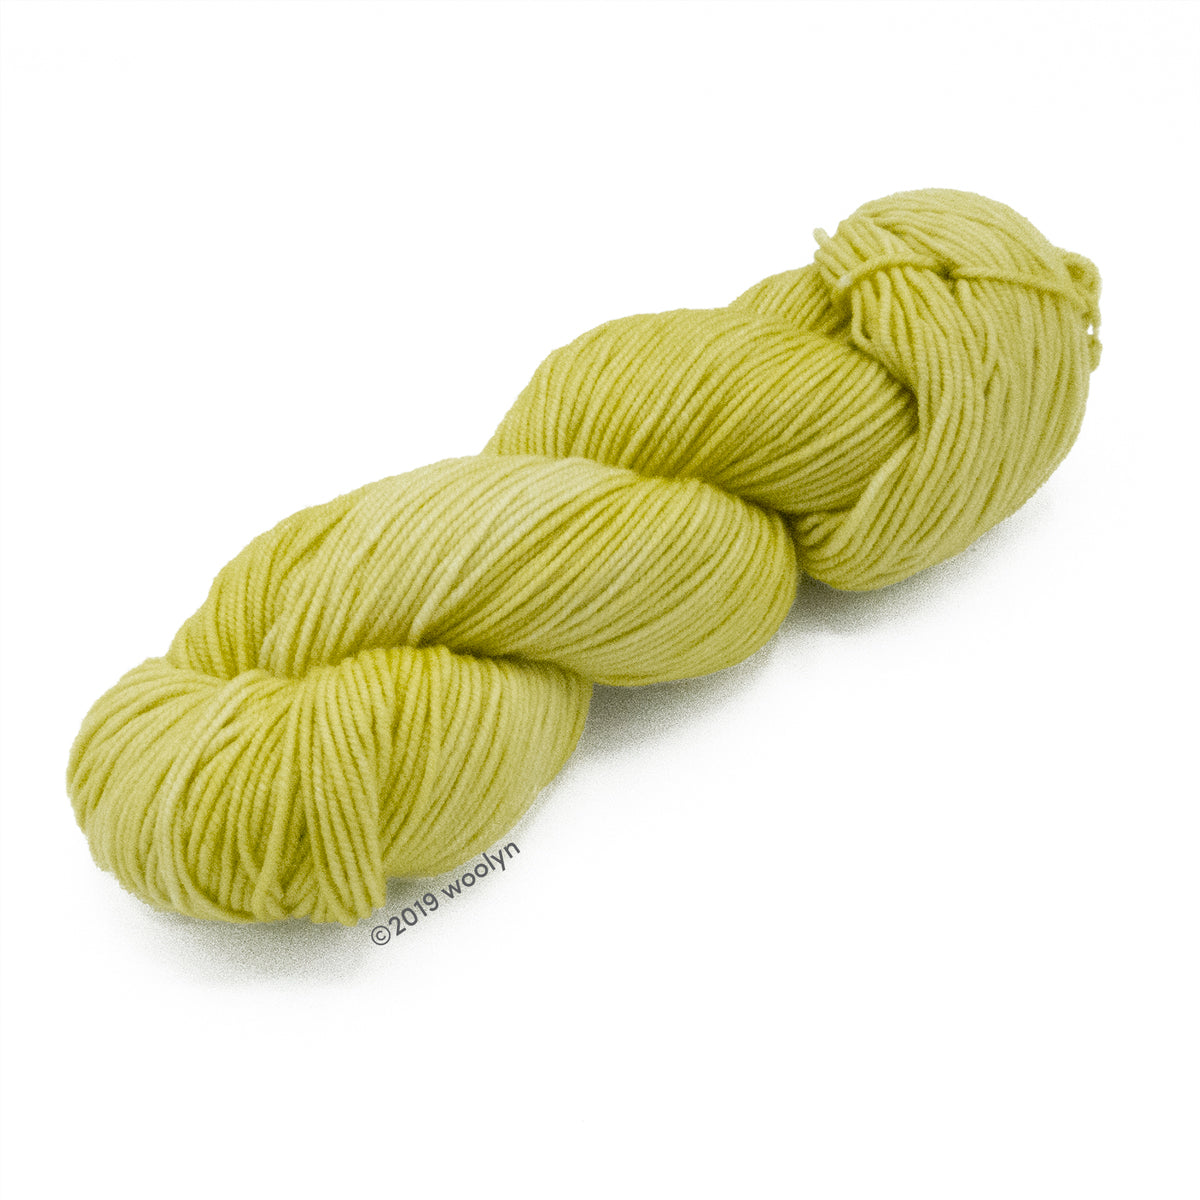 A skein of Knitted Wit Victory DK in Celery Hearts a pale yellow green color.